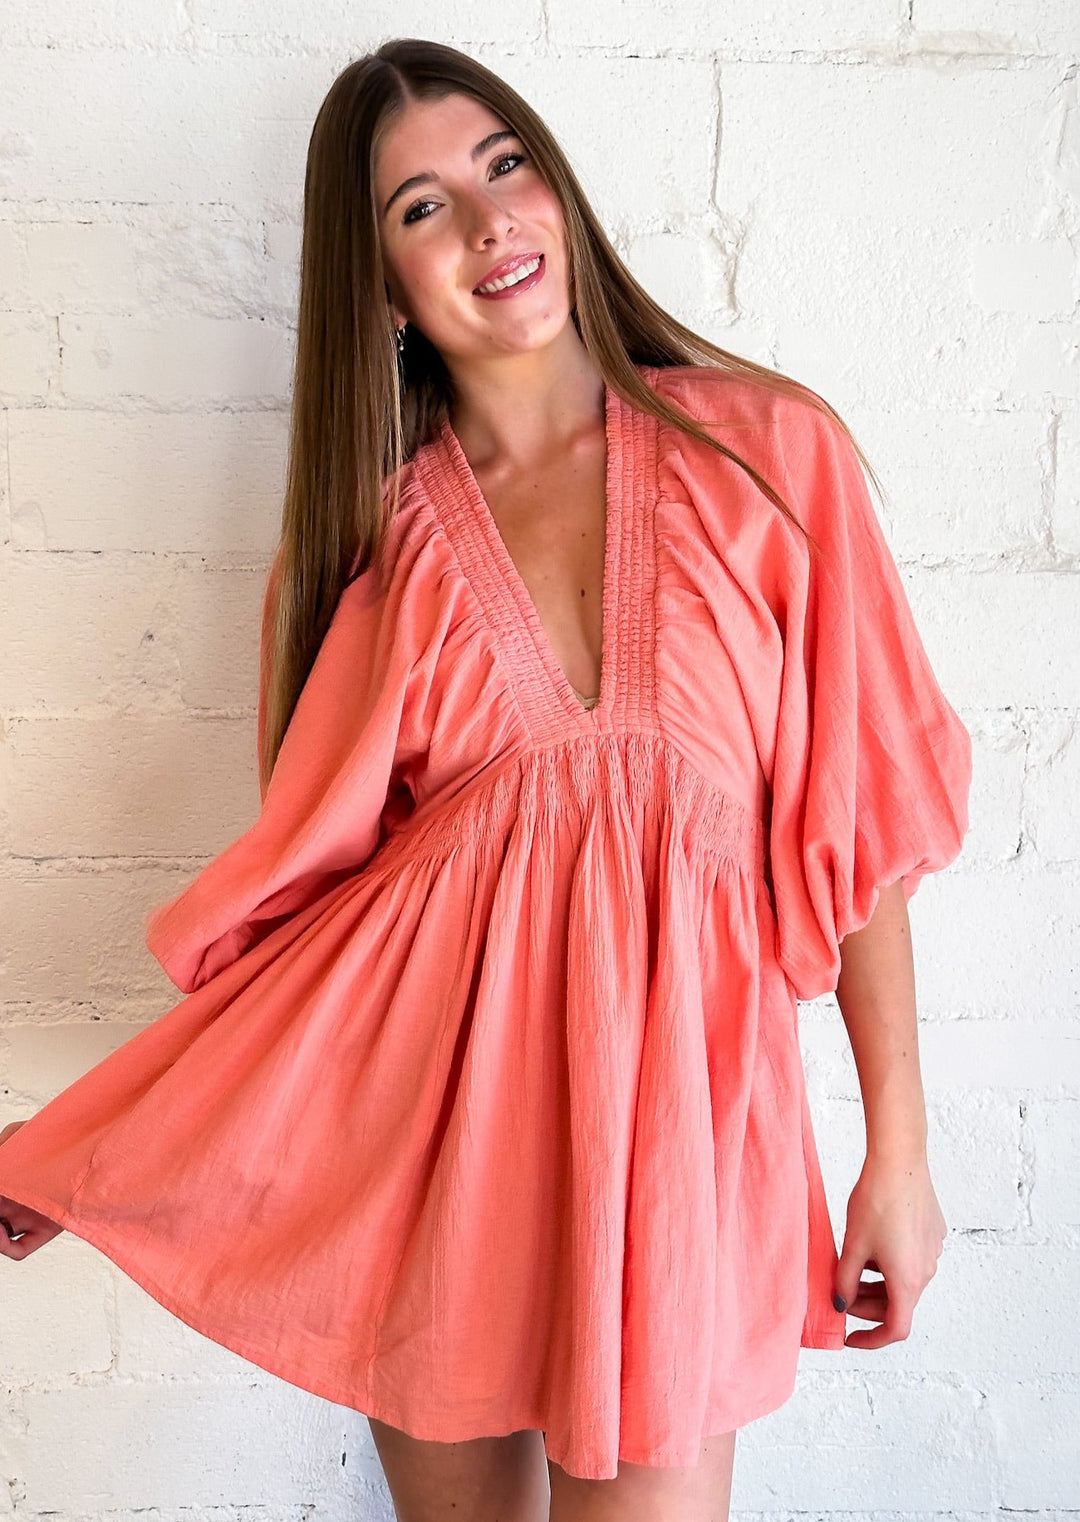 Free People For The Moment Mini, Dresses, Free People, Adeline, dallas boutique, dallas texas, texas boutique, women's boutique dallas, adeline boutique, dallas boutique, trendy boutique, affordable boutique